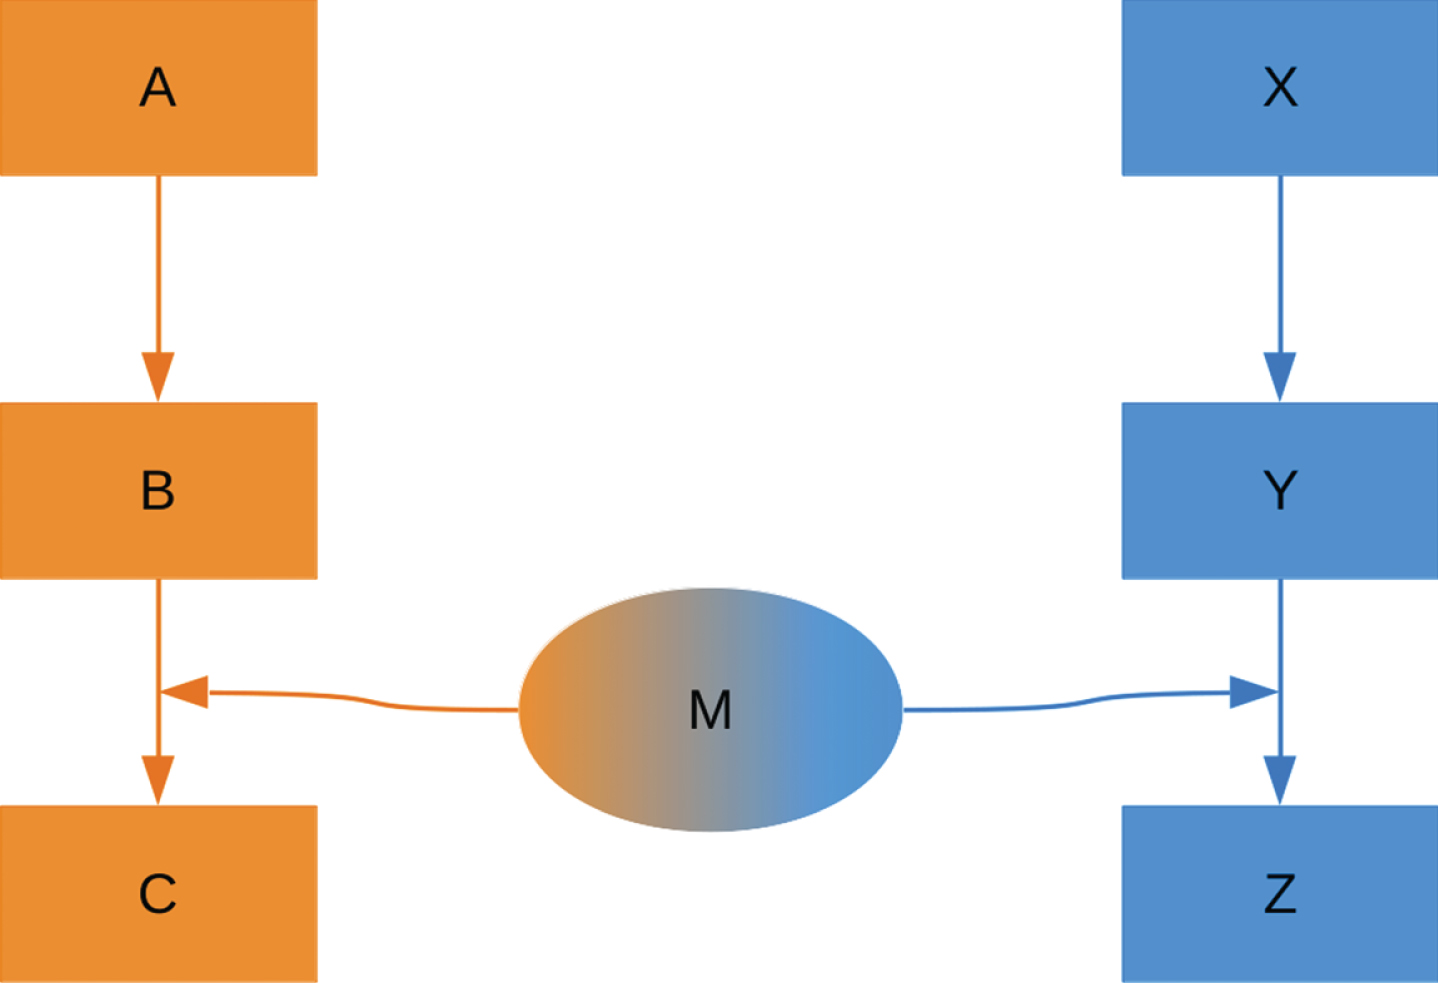 Representation of the simple network model used to classify and simulate moonlighting proteins. The model has two pathways, named pathway A and pathway X. A moonlighting protein M has a function in both pathways and can switch between these. The final products of the pathways, C and Z, are used to assess pathway behavior.